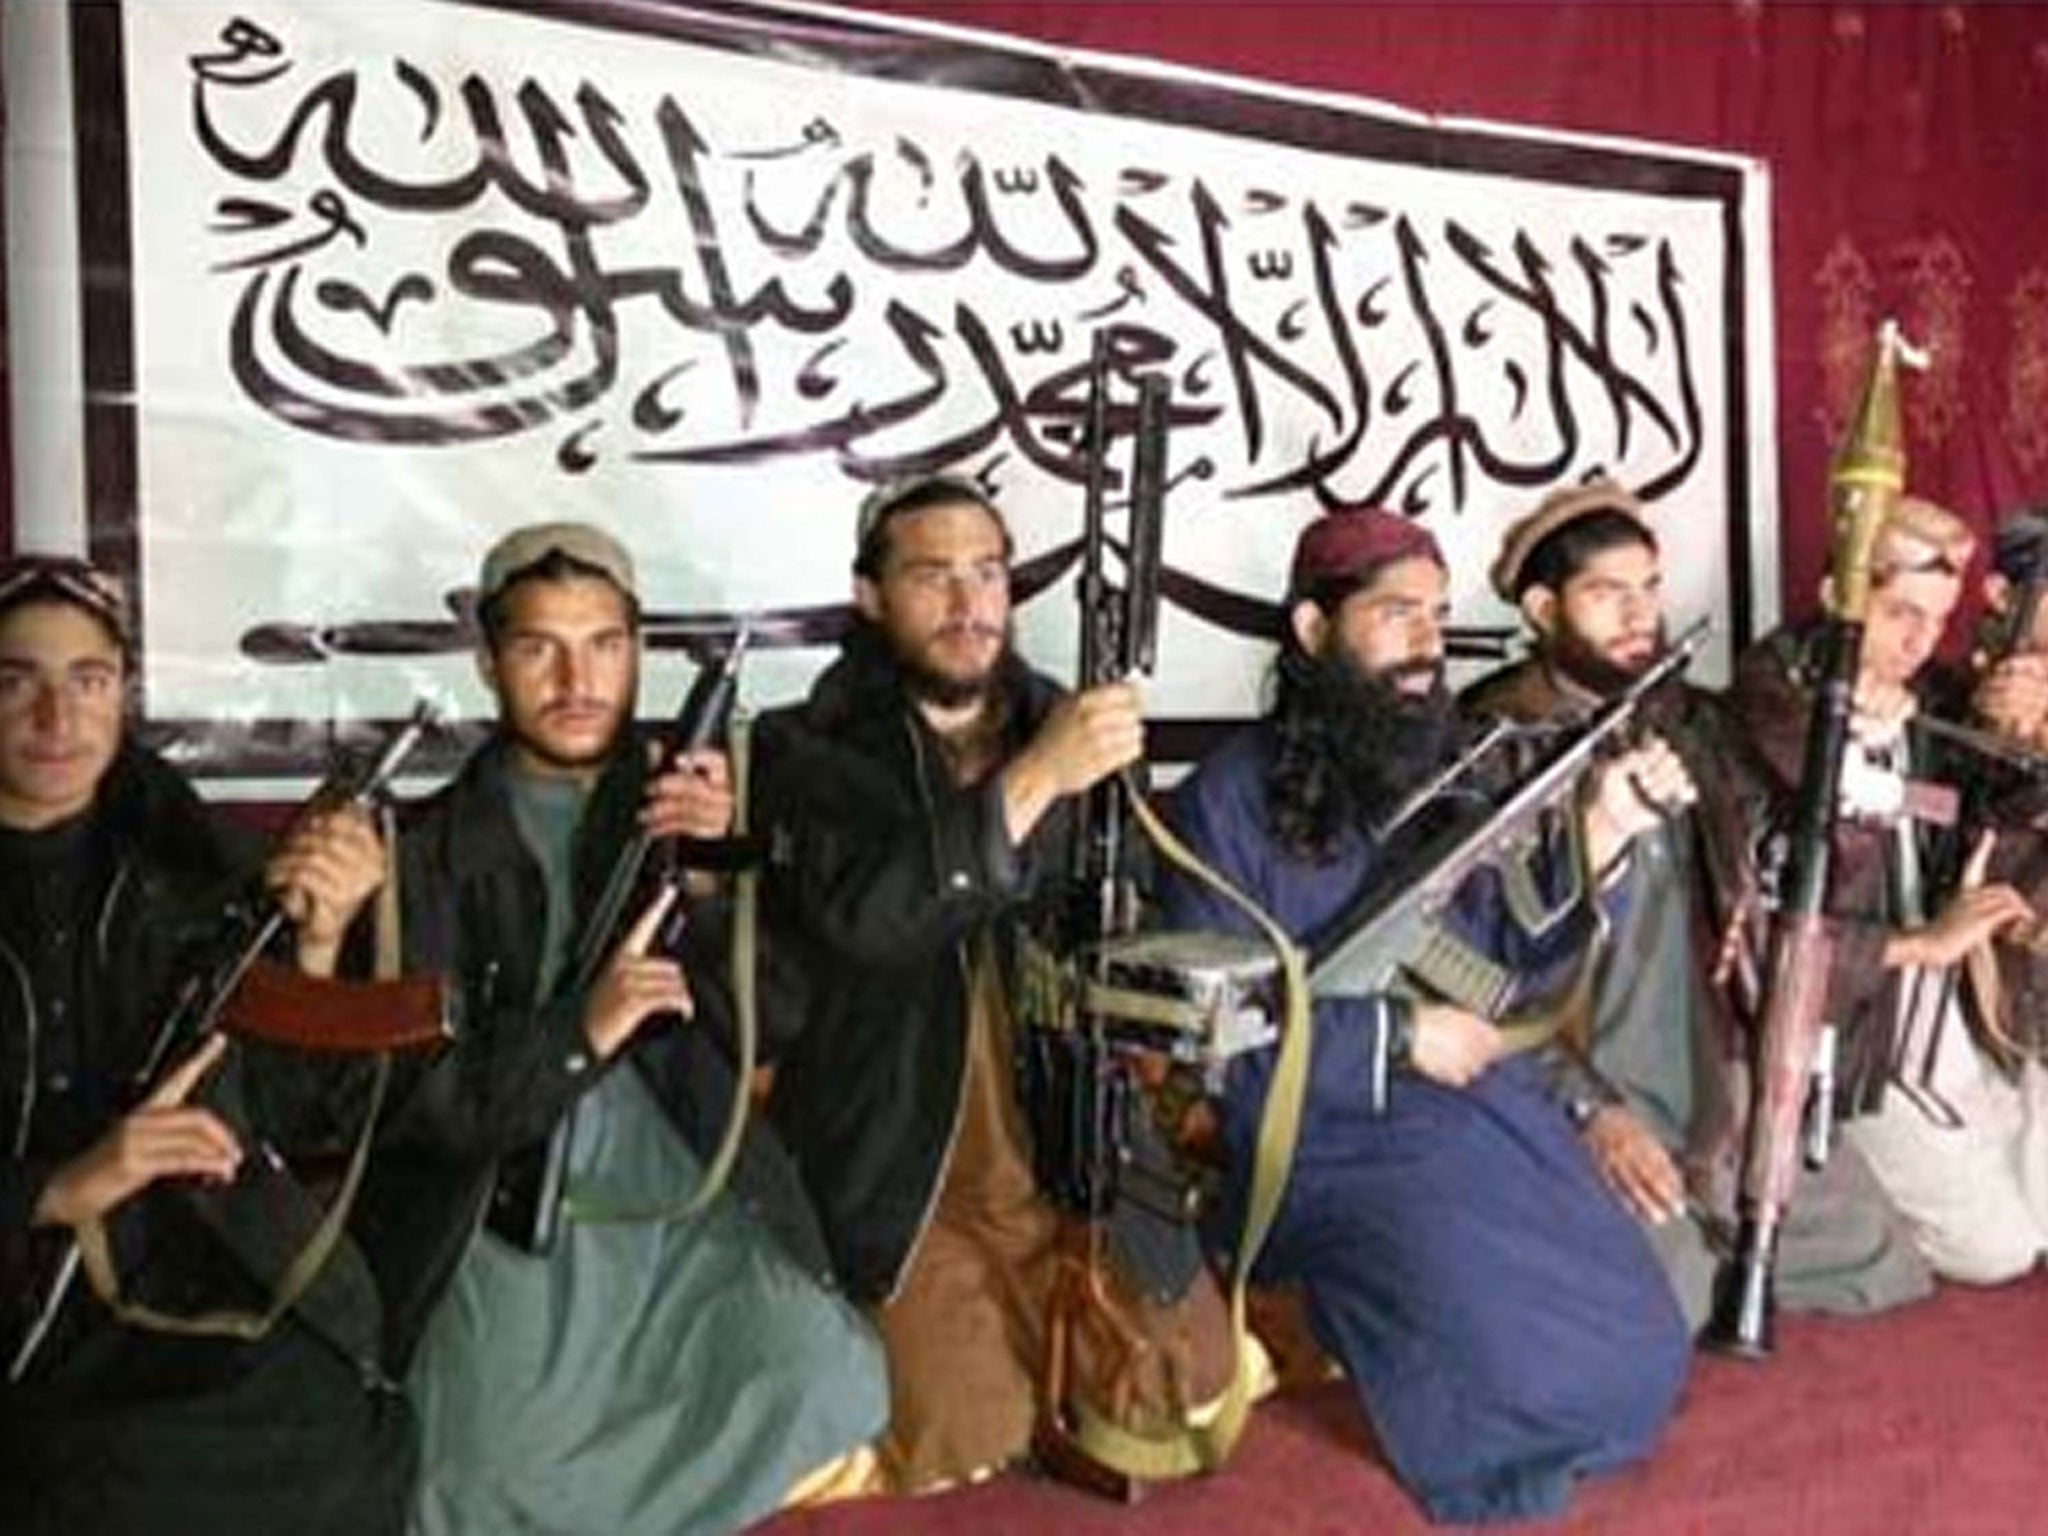 The Taliban fighters who stormed a military-run school in Peshawar, Pakistan on Tuesday, in an image released by the Pakistani Taliban